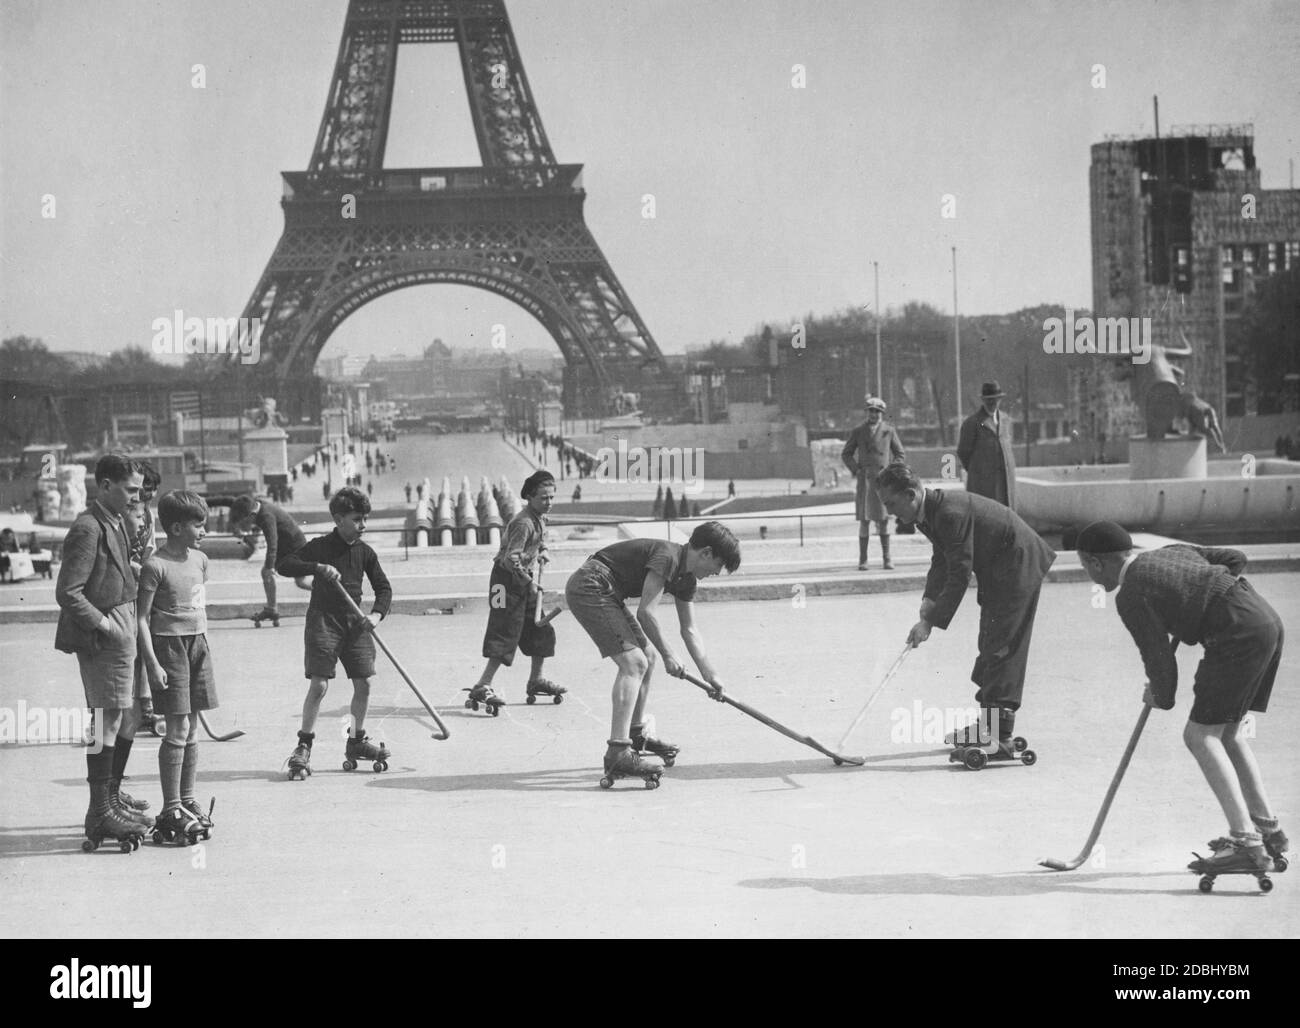 Some boys play field hockey on roller skates on the Place du Trocadero in front of the Eiffel Tower in Paris. On the right is the Trocadero Fountain, which has a statue of a bull in the middle. Stock Photo